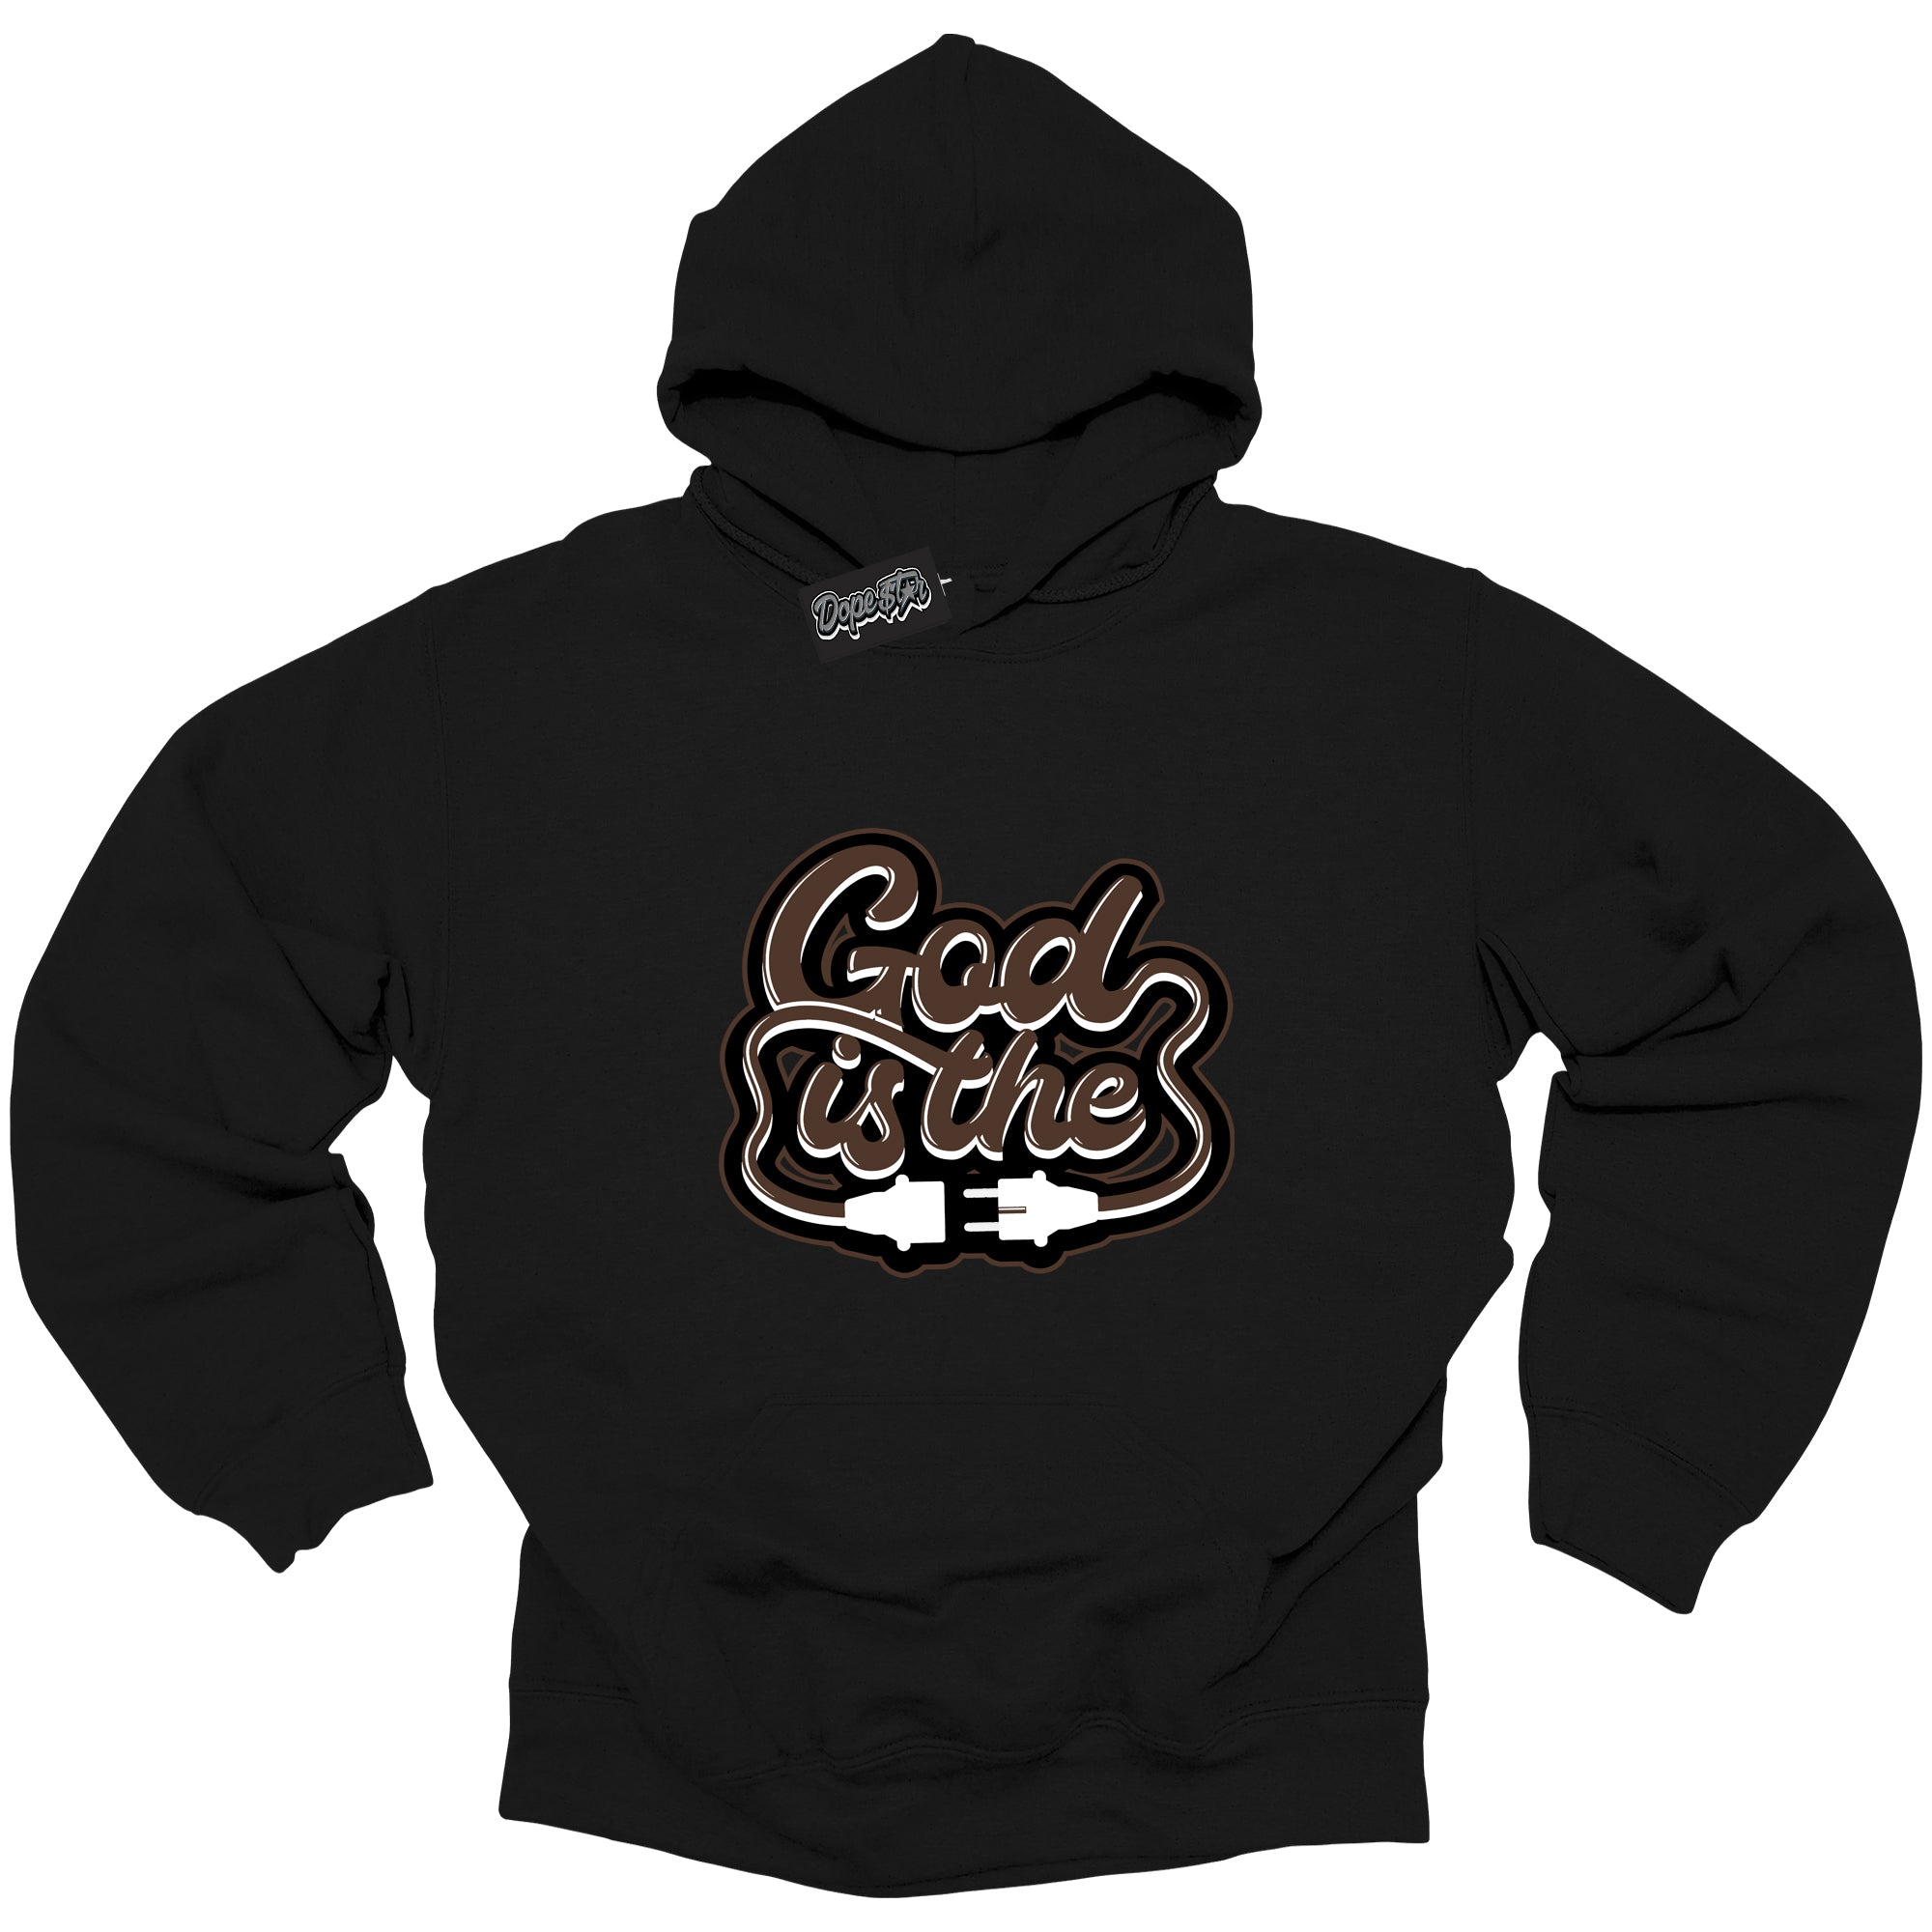 Cool Black Graphic DopeStar Hoodie with “ God Is The “ print, that perfectly matches Palomino 1s sneakers